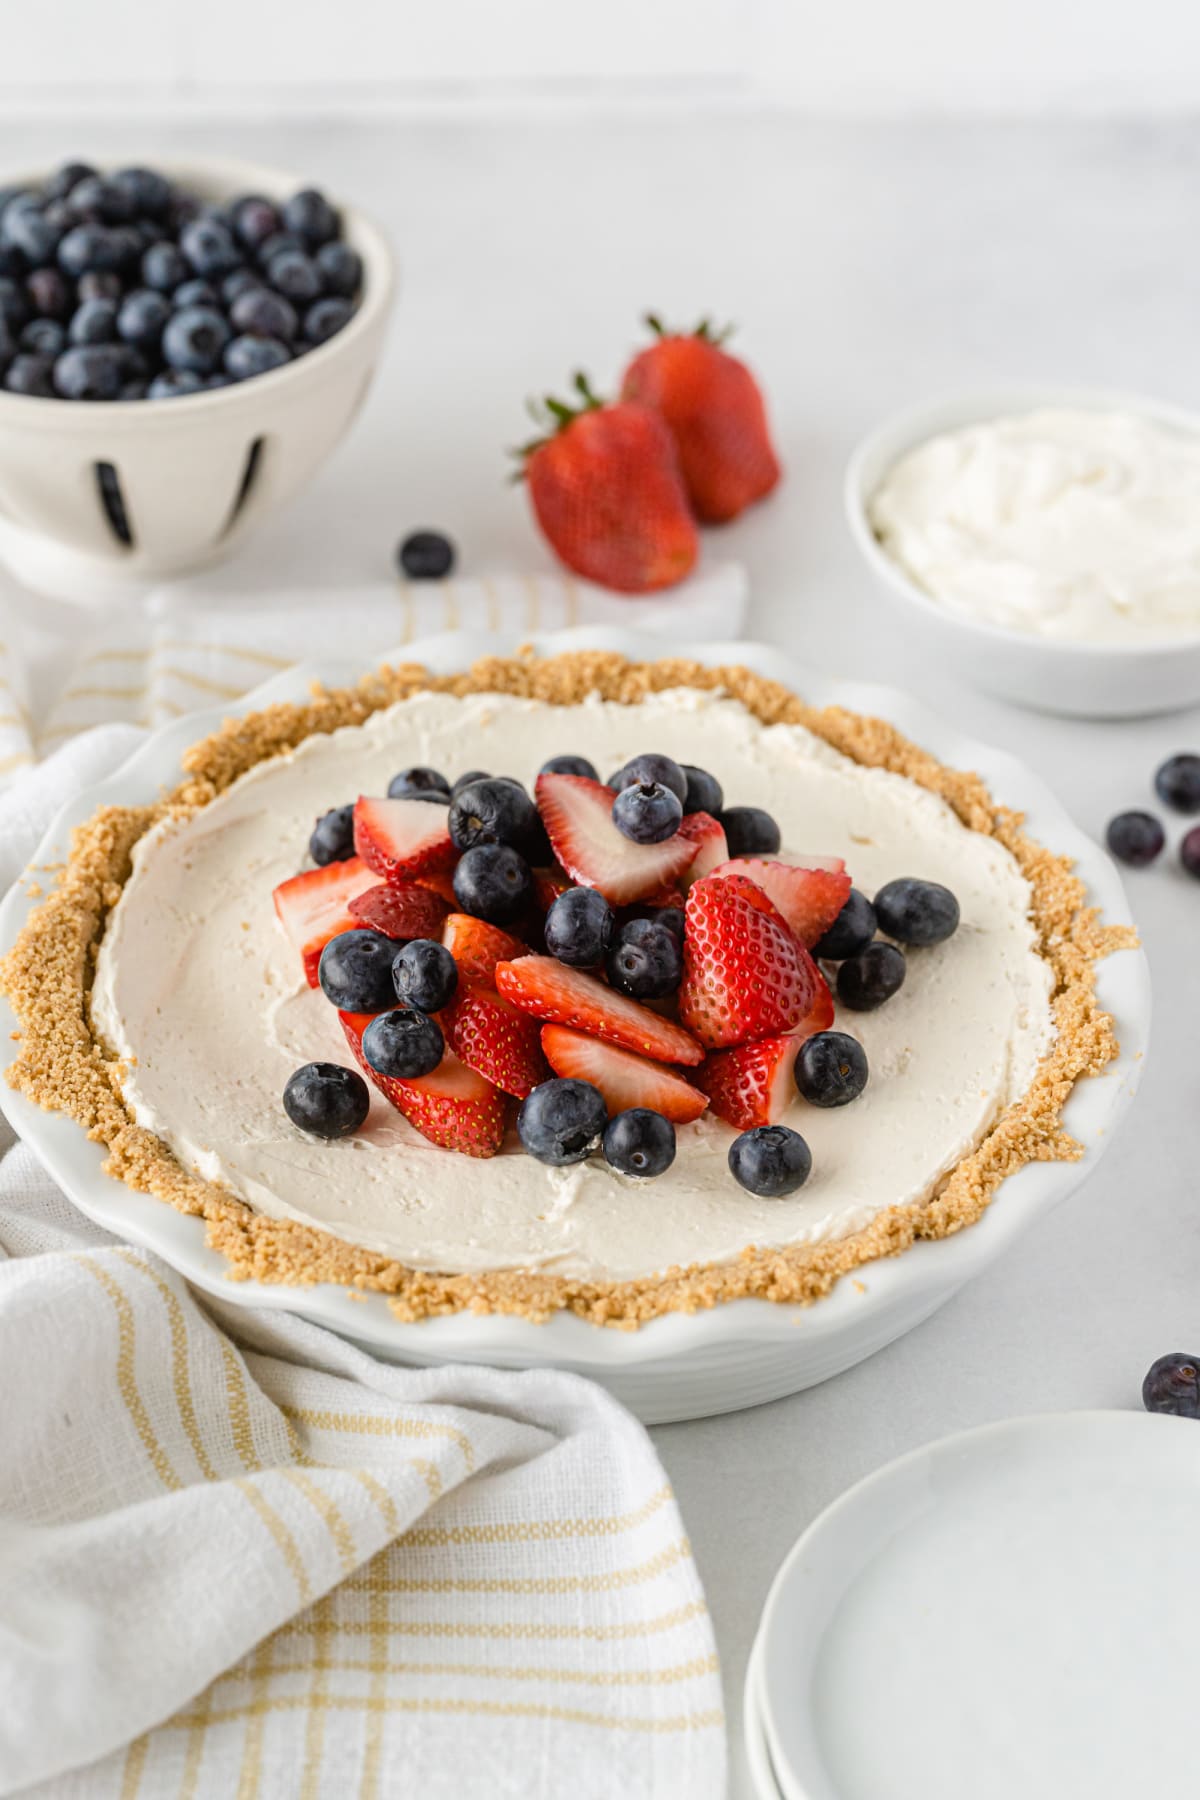 No bake cool whip cheesecake with berries and striped napkin